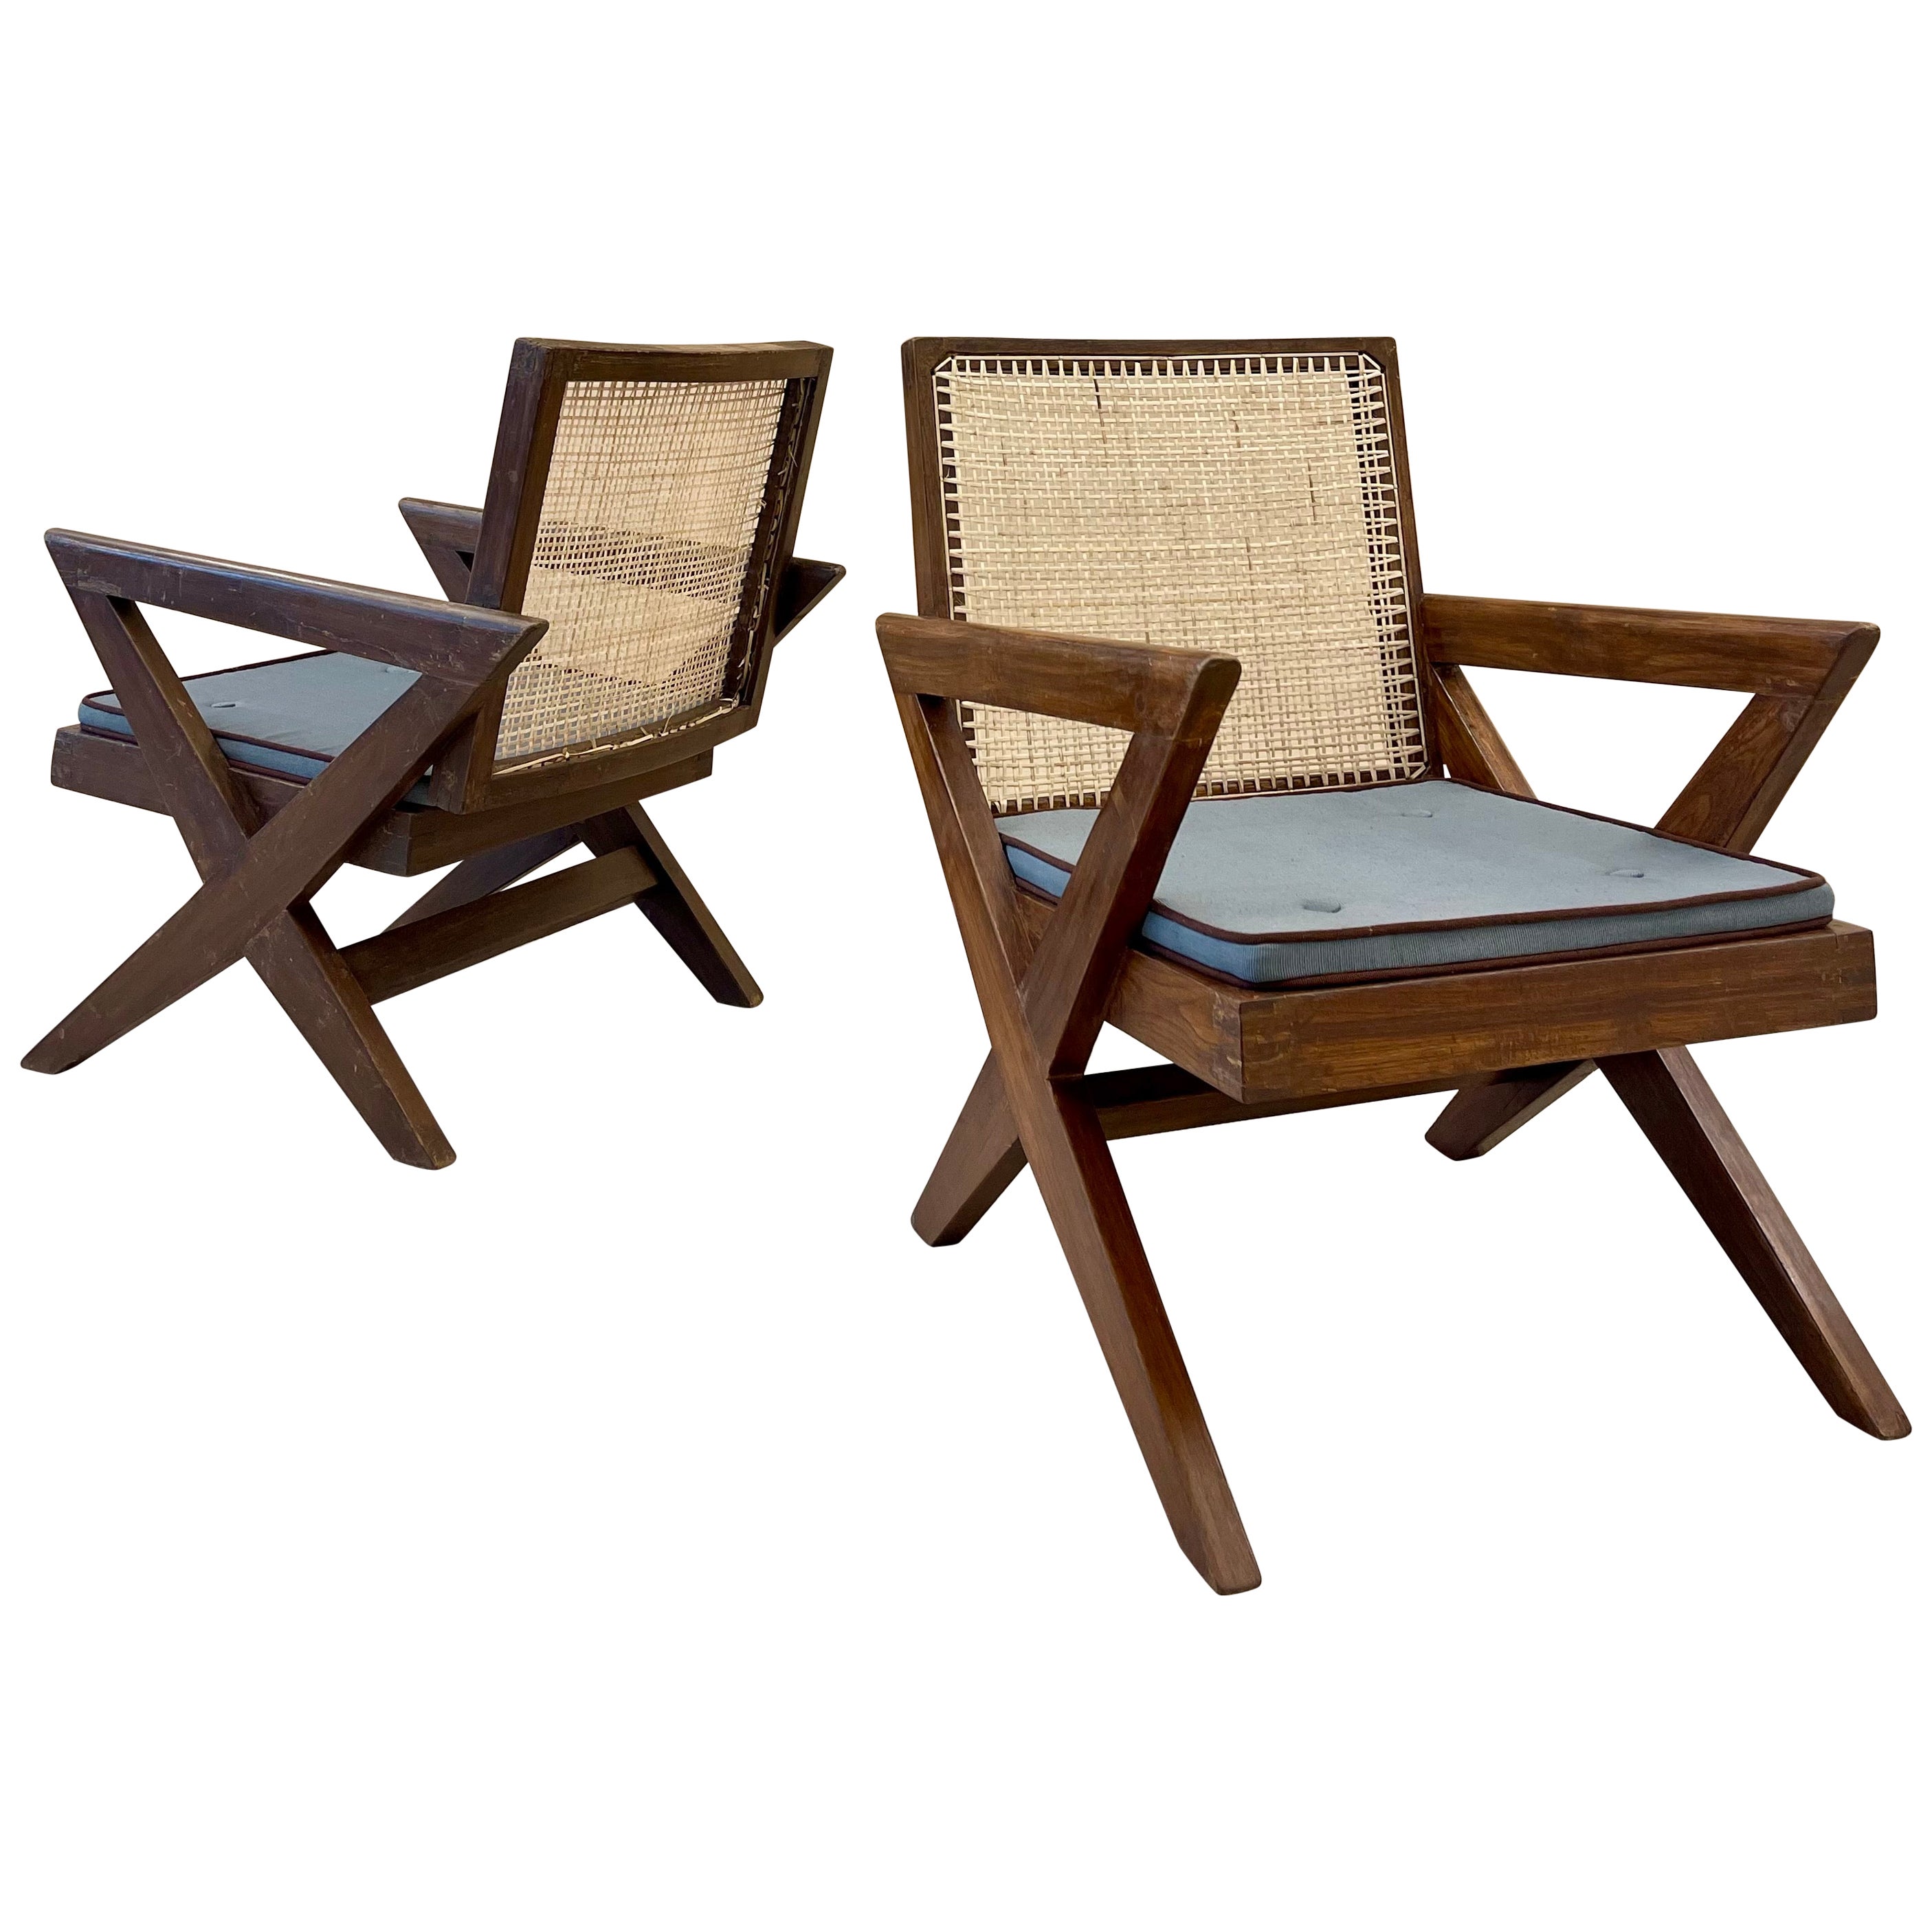 Pierre Jeanneret, French Mid-Century Modern, Lounge Chairs, Chandigarh, 1950s For Sale